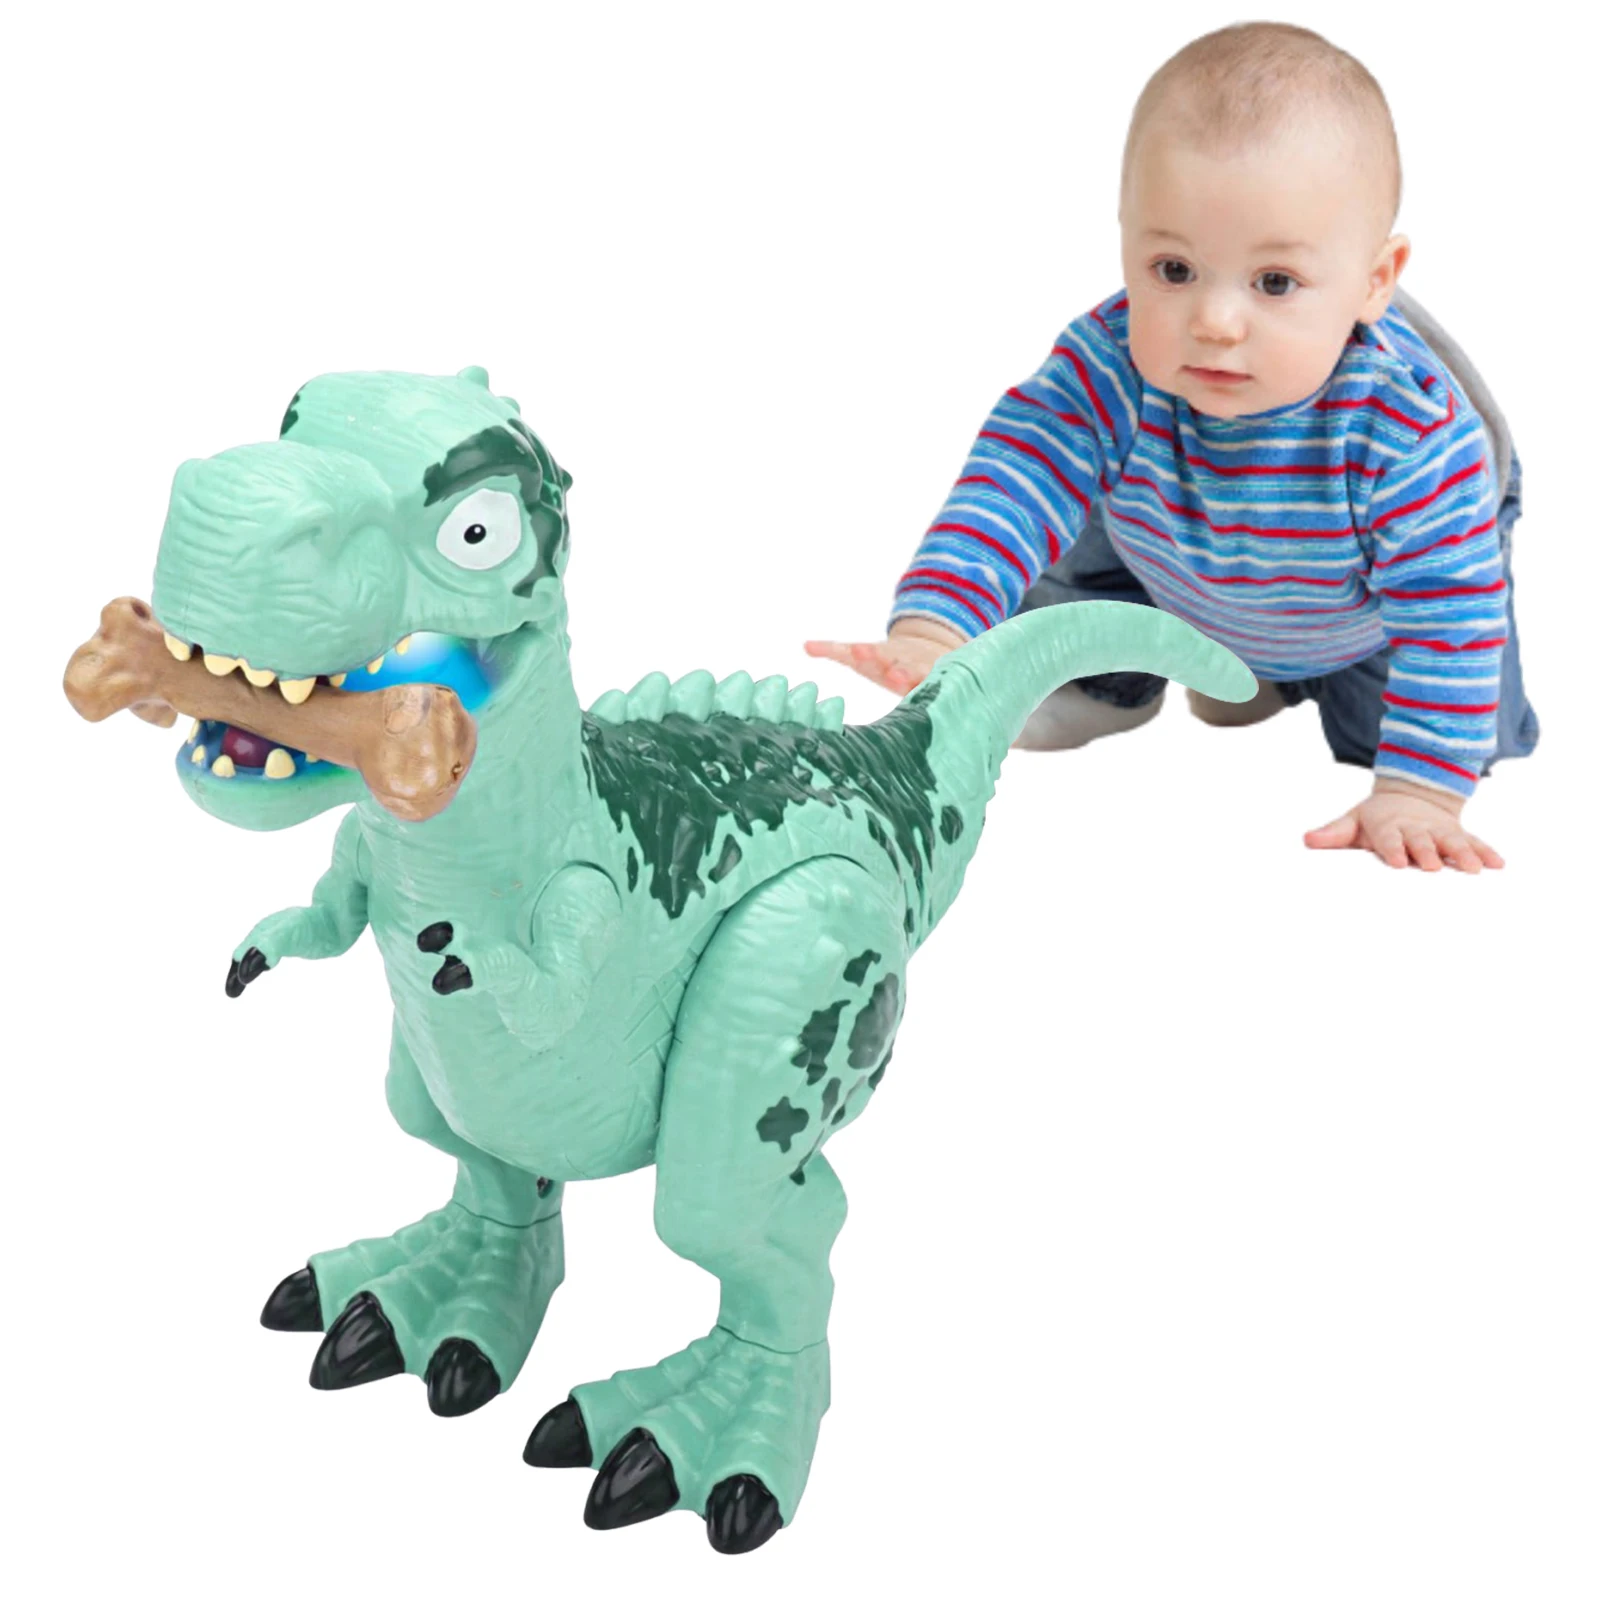 

Robotic Toy For Kids Electric Dinosaur Toy With Sounds And Roaring Dinosaur Toy Walking Tyrannosaurus Toy For Kids And Toddlers